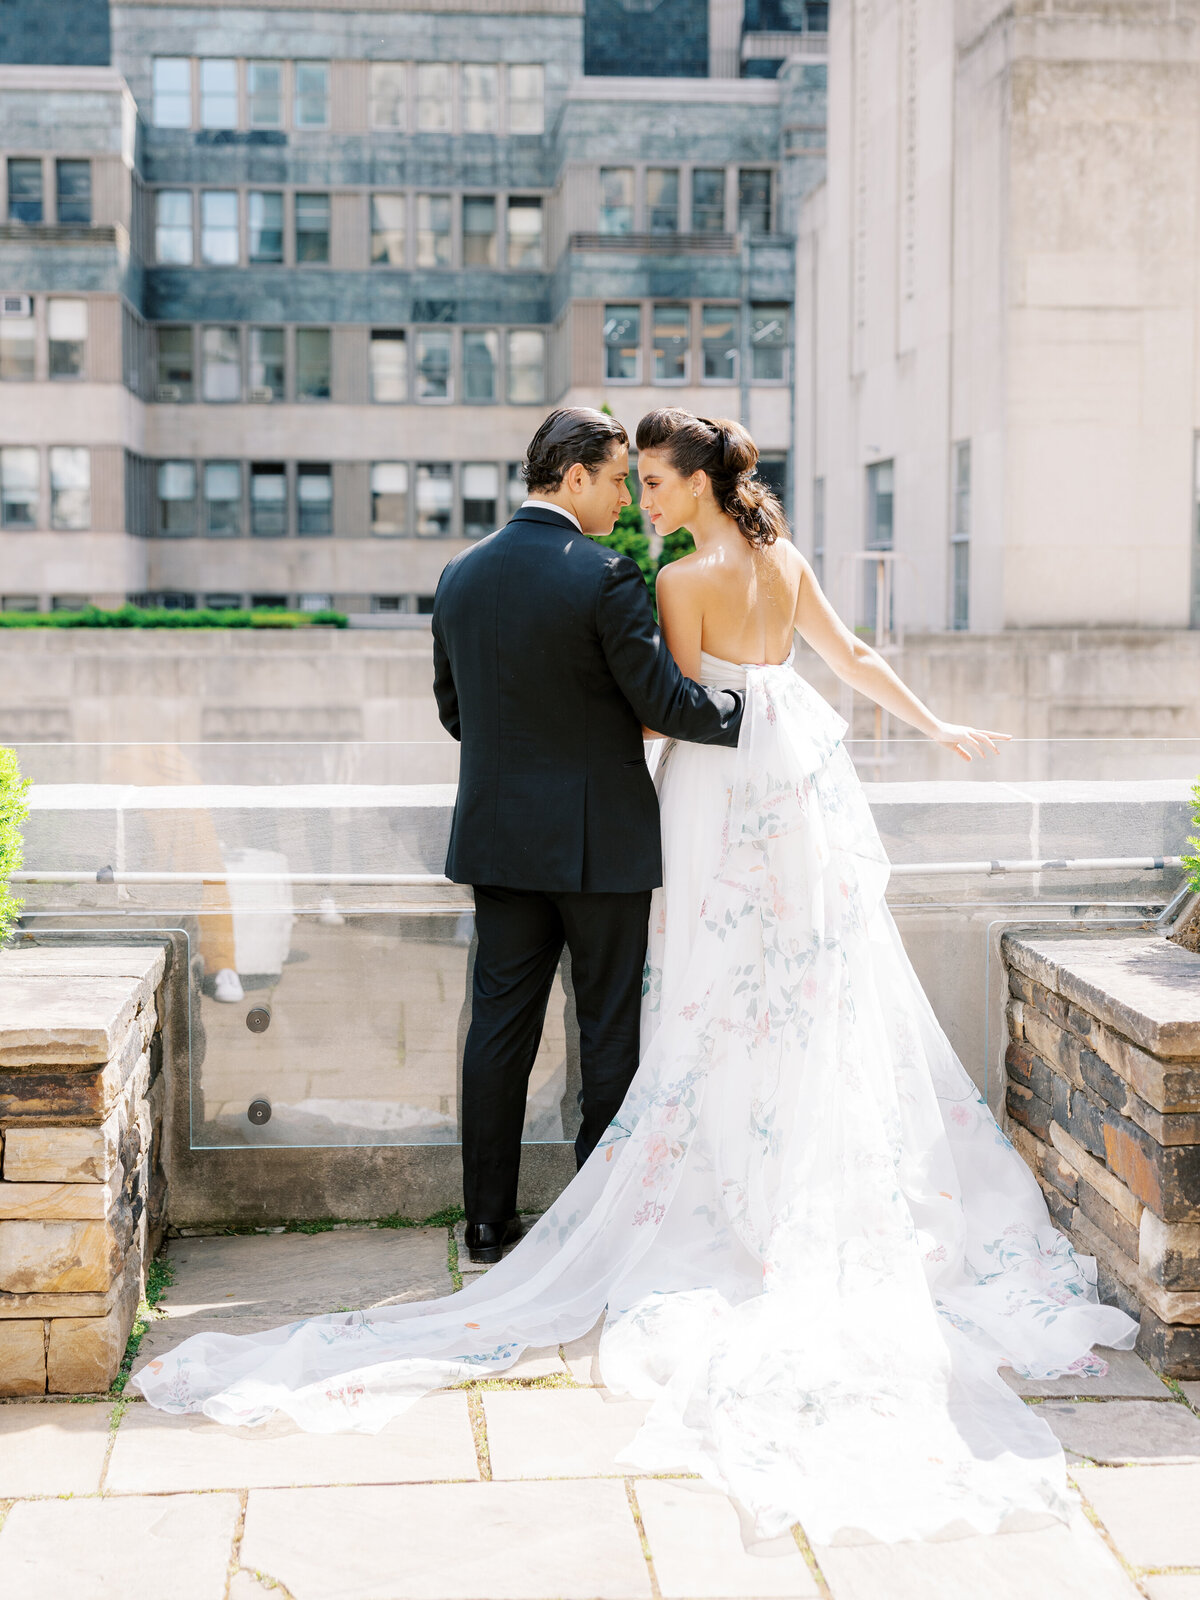 bride in Monique Lhuillier floral gown and groom in black tux stand together at rooftop wedding in New York City